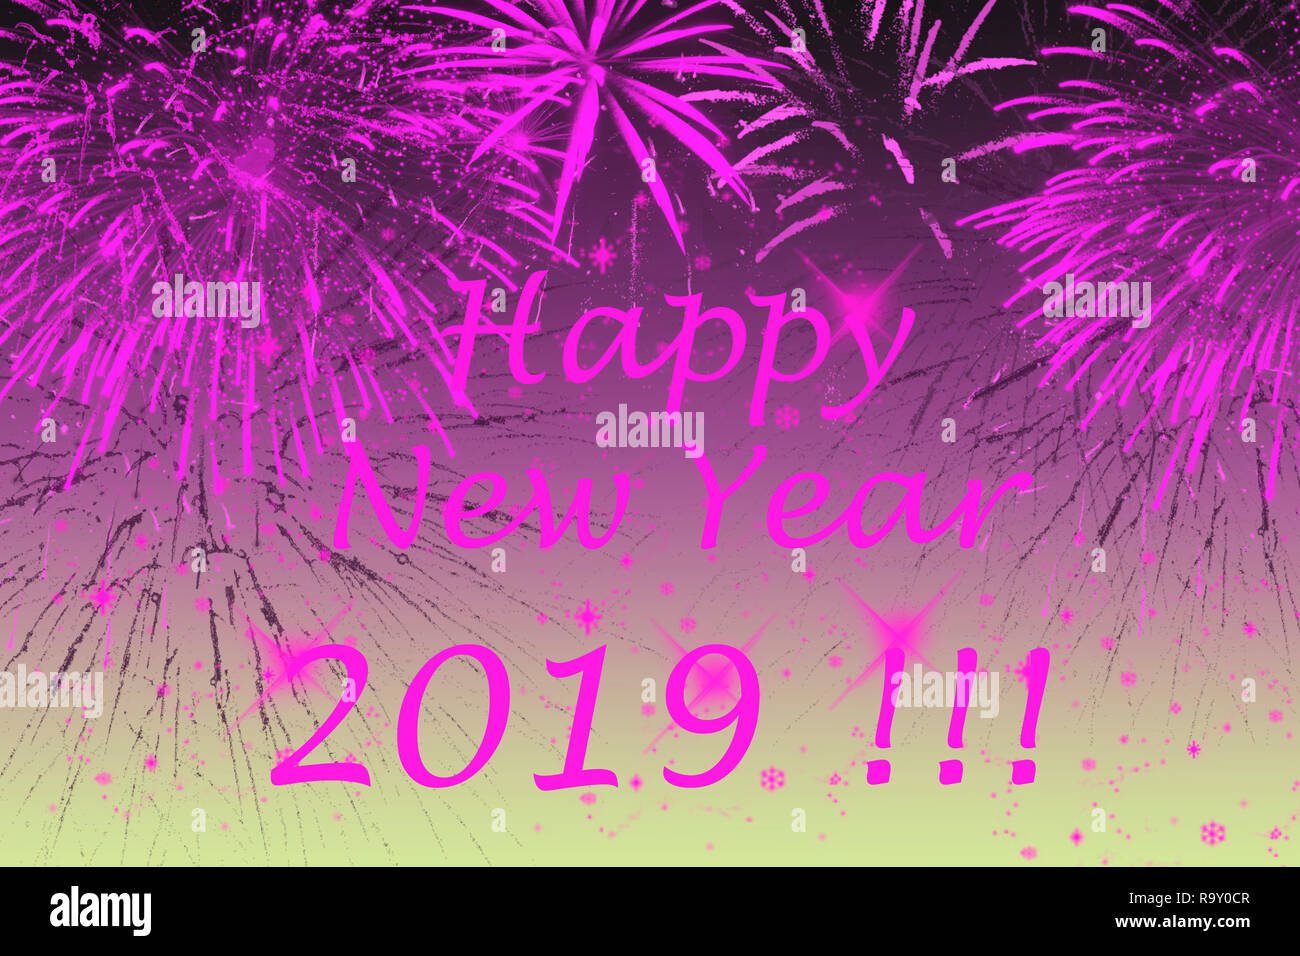 New Year 2019 greetings card. Fireworks effects on background. Stock Photo